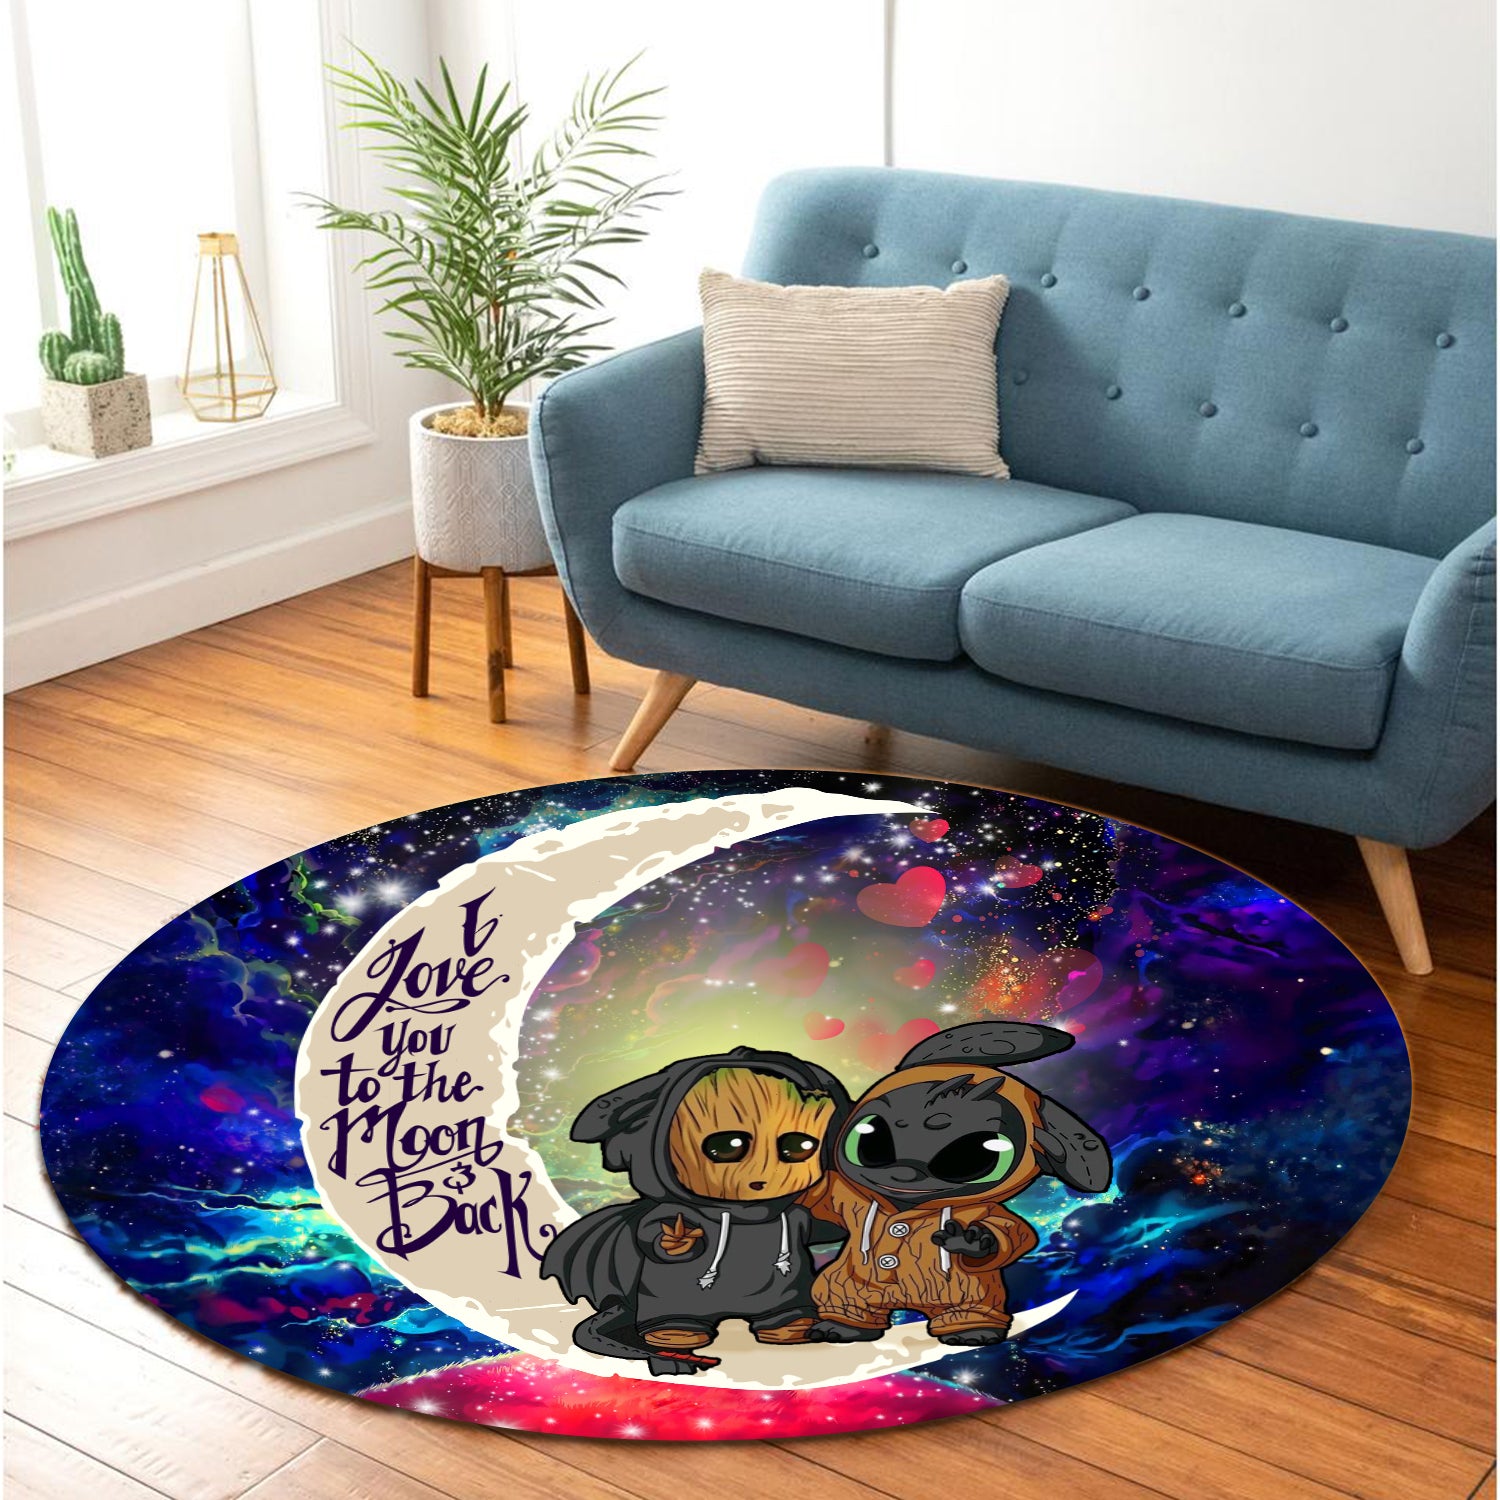 Groot And Toothless Love You To The Moon Galaxy Round Carpet Rug Bedroom Livingroom Home Decor Nearkii